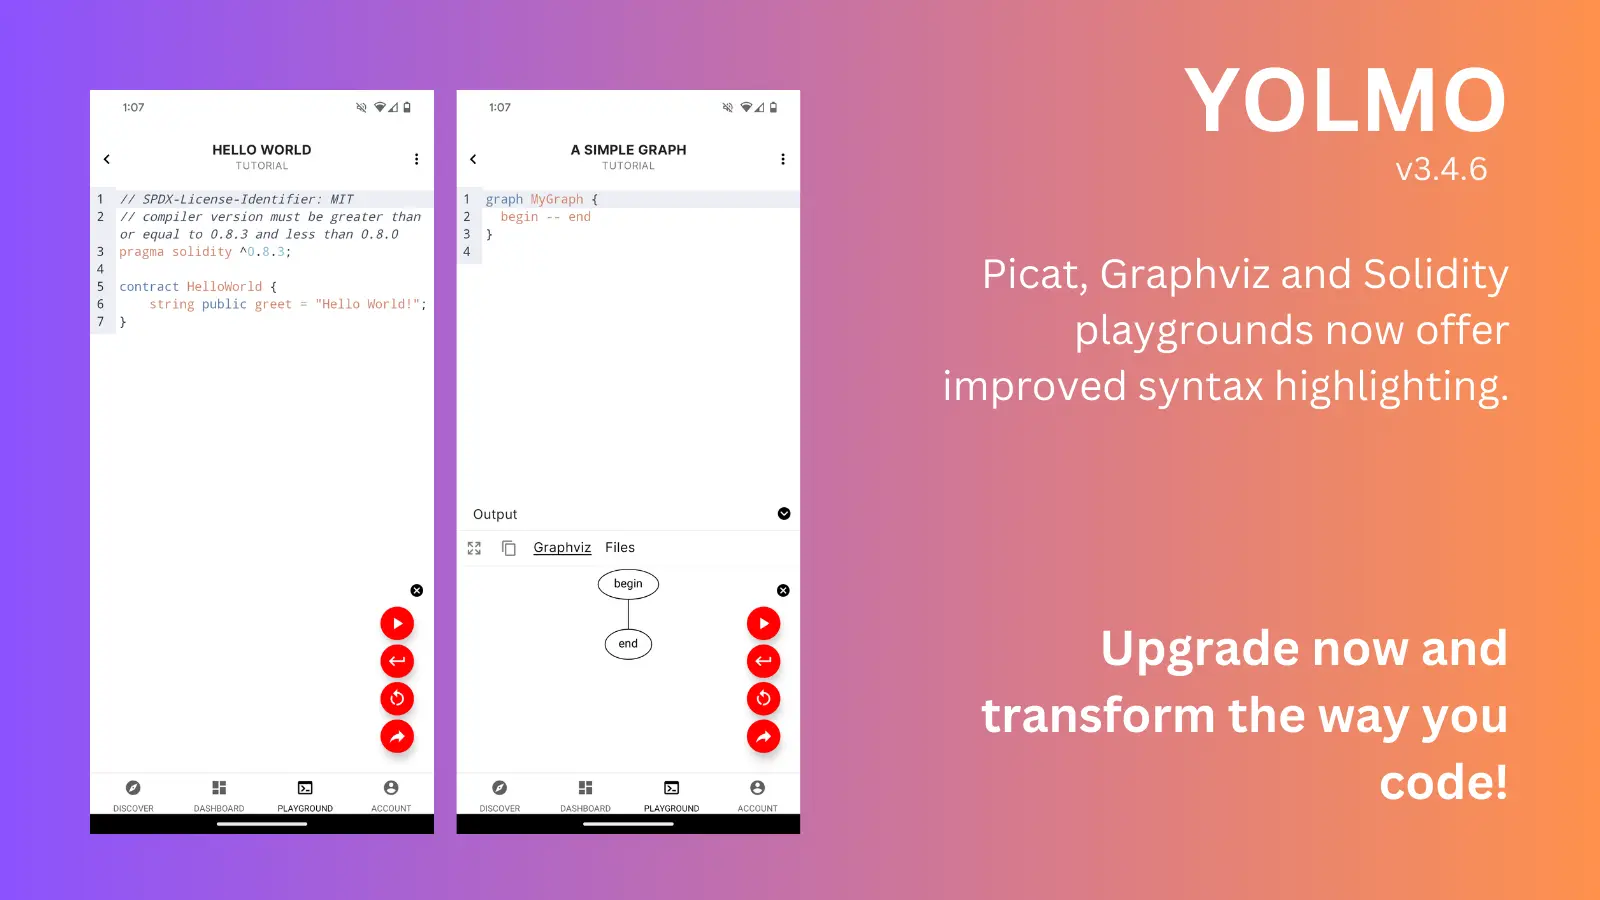 Picat, Graphviz and Solidity playgrounds now offer improved syntax highlighting.